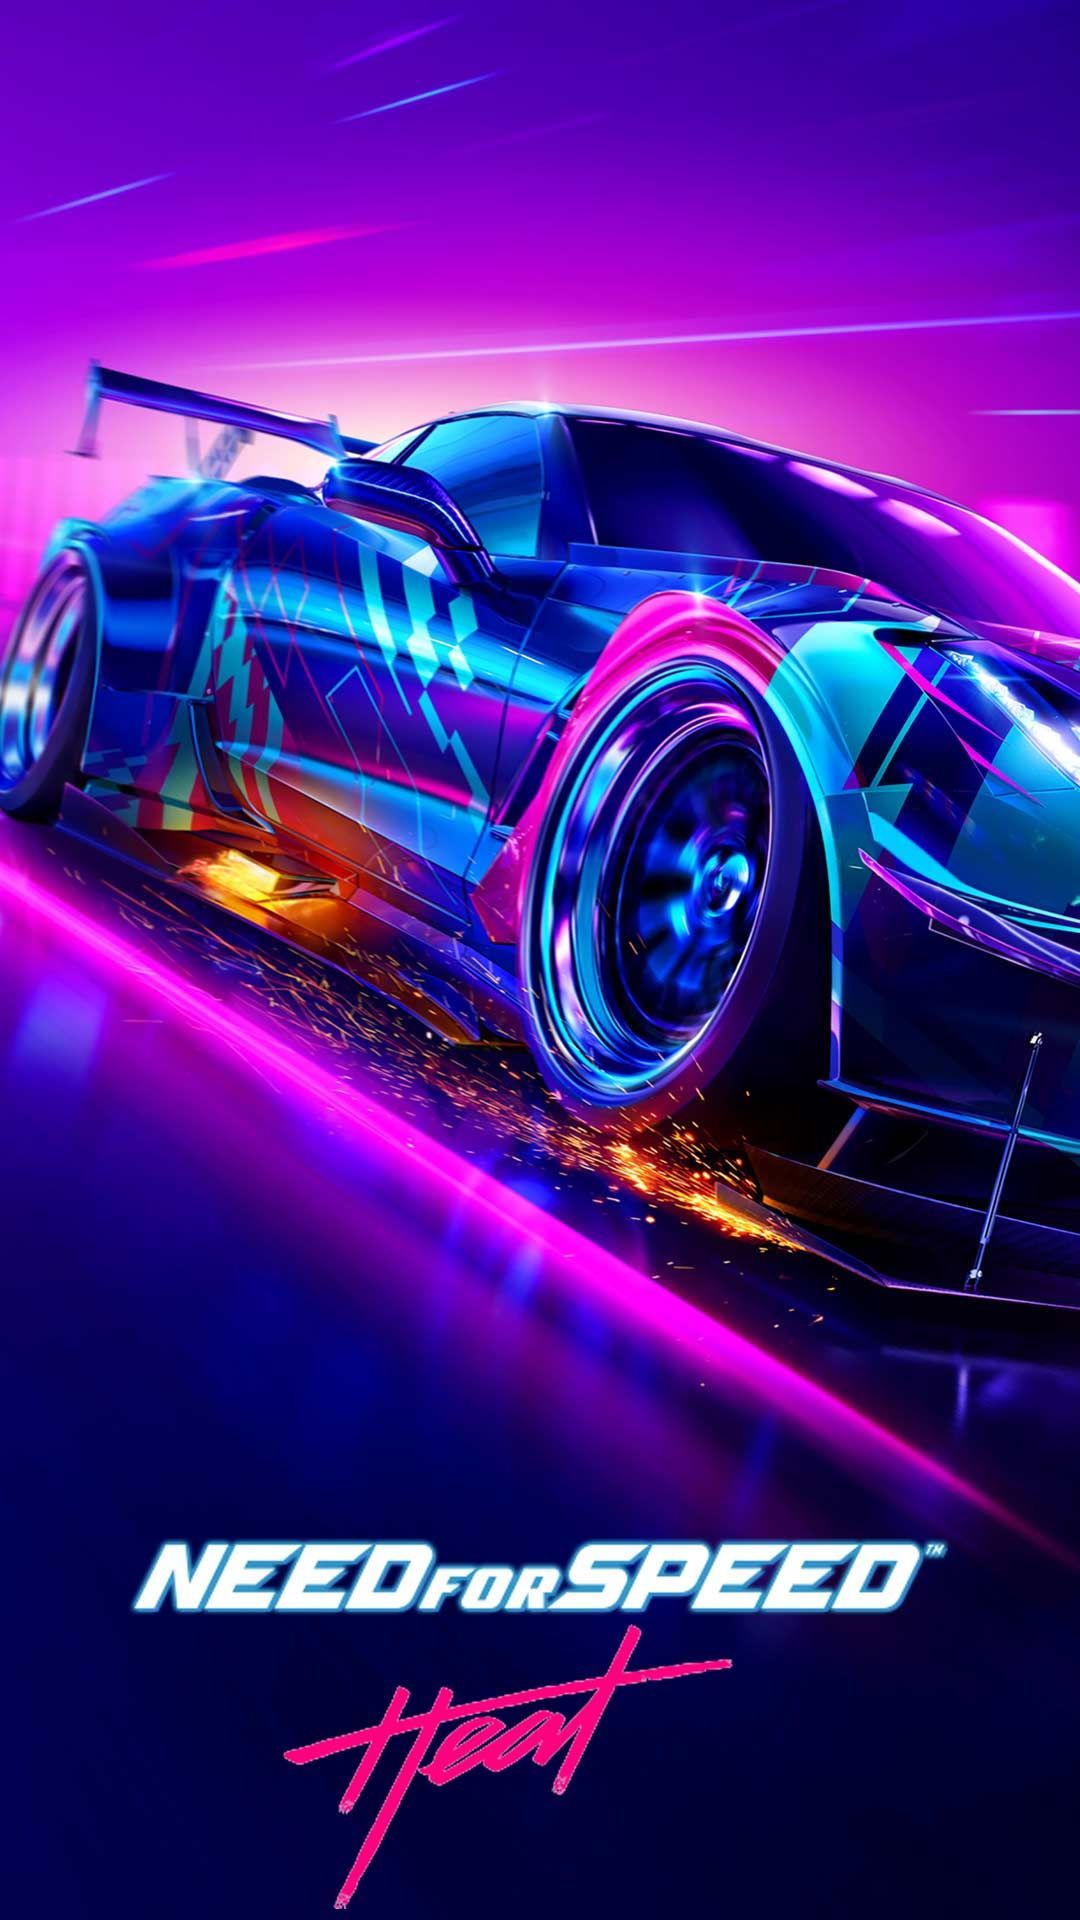 Need for speed heat wallpaper HD phone background Cars Poster art on iPhone android lock screen. Car iphone wallpaper, Need for speed cars, HD phone background